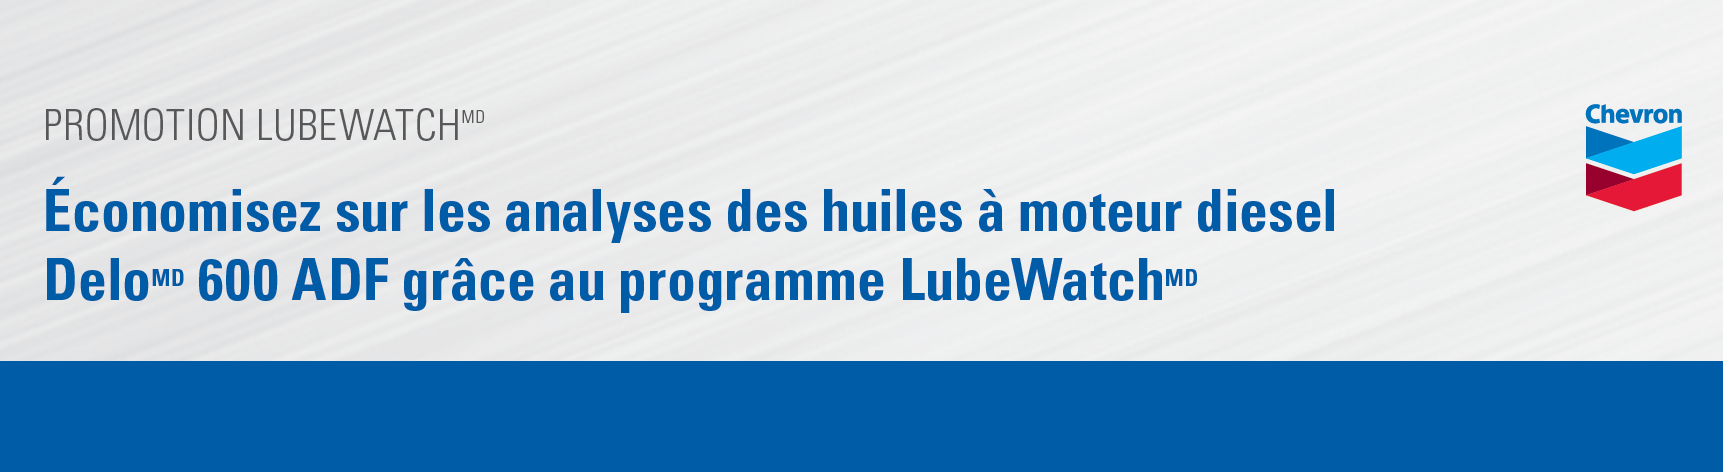 Promotion LubeWatch